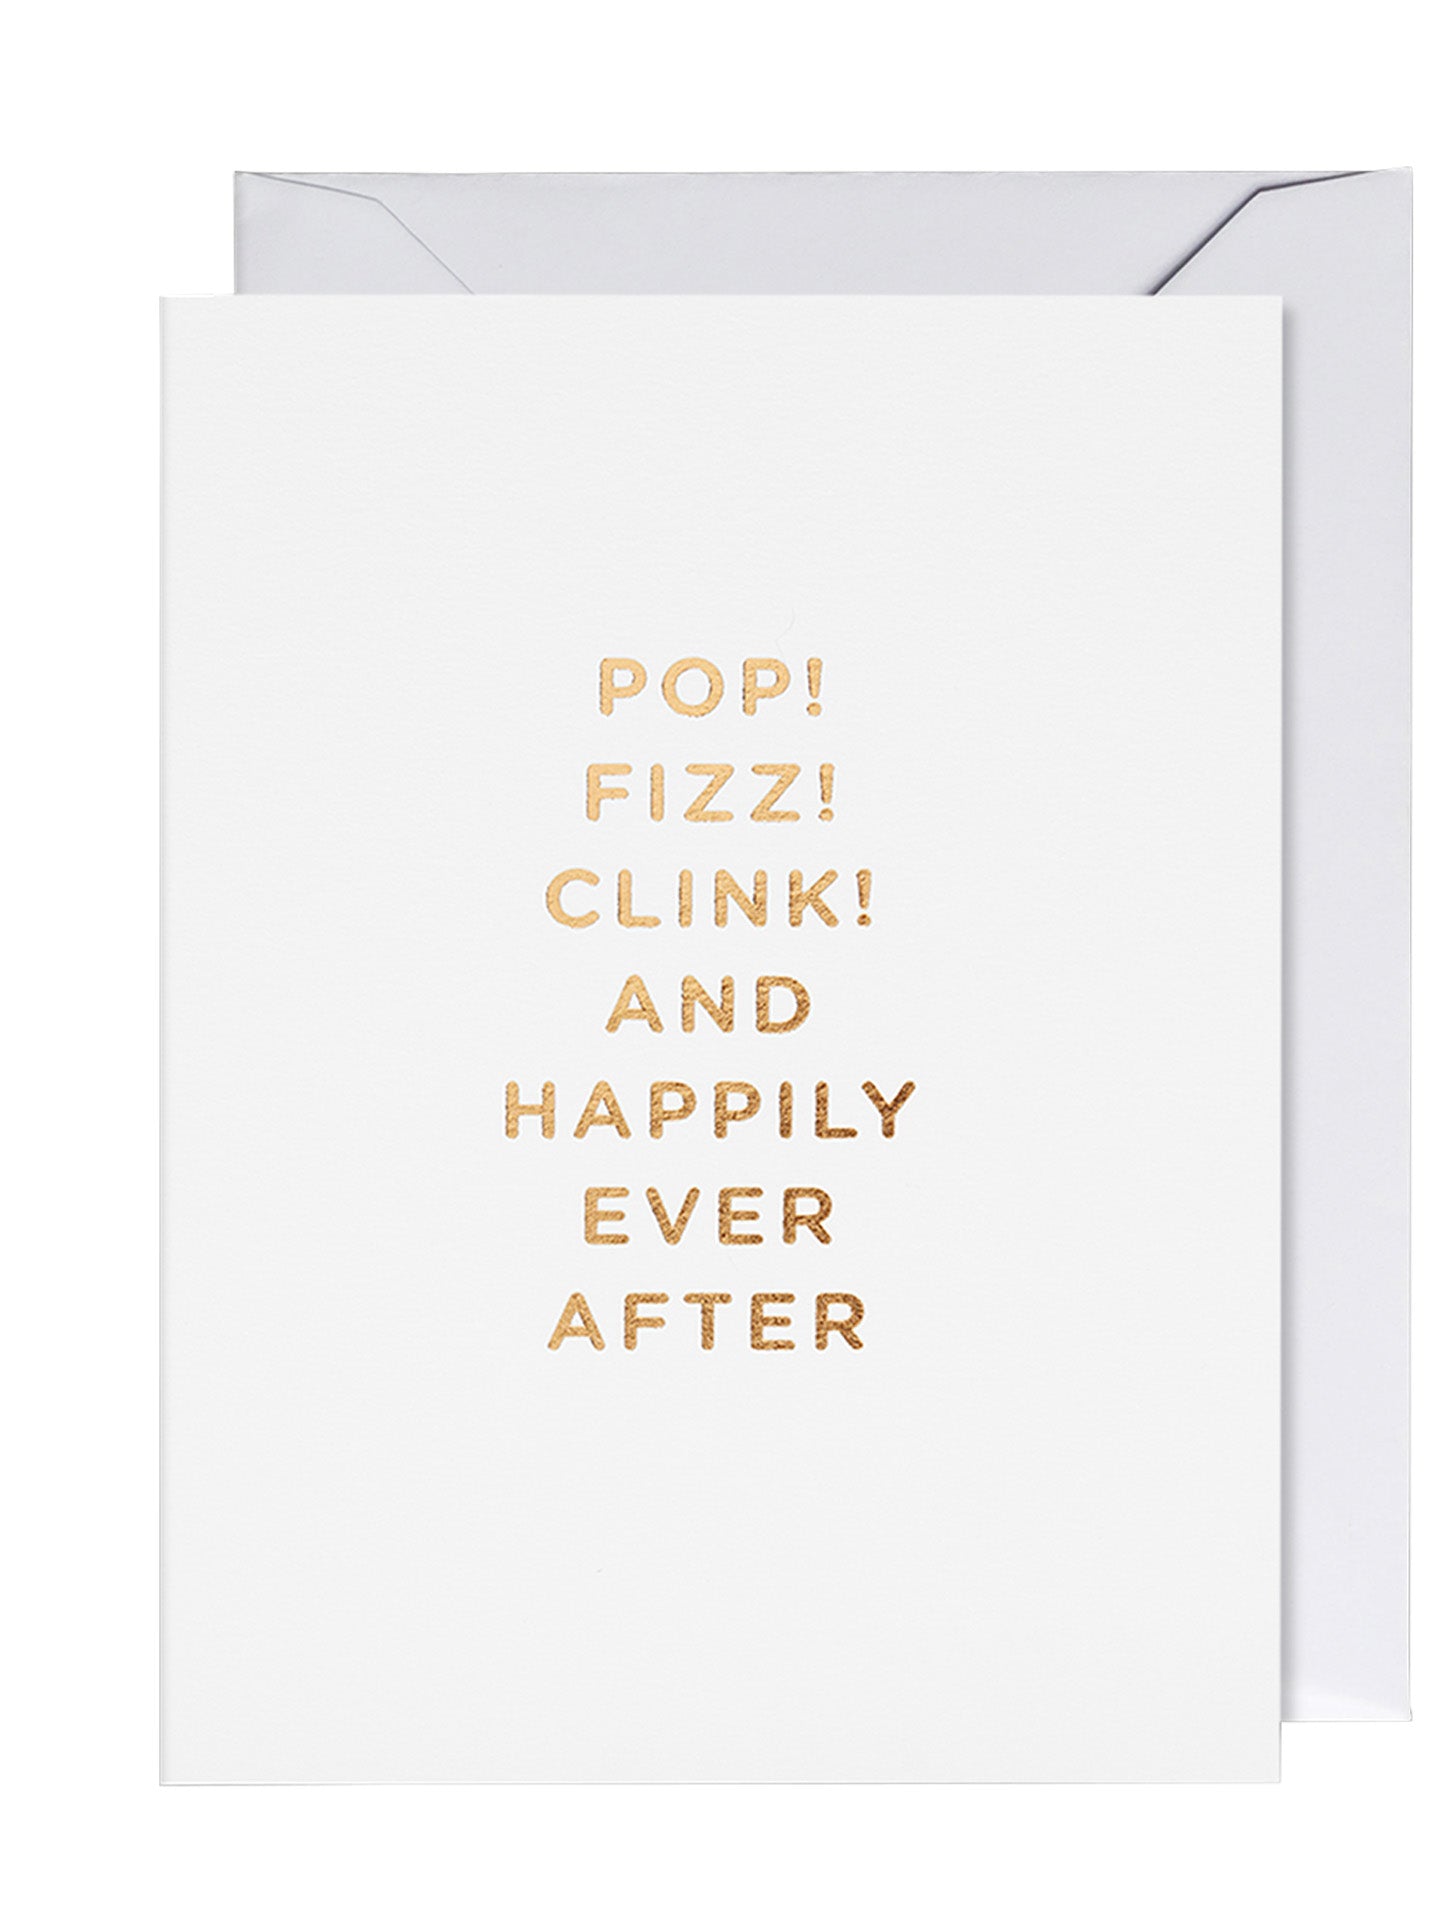 Pop! Fizz! Clink! and Happily Ever After Mini Wedding card by Cherished